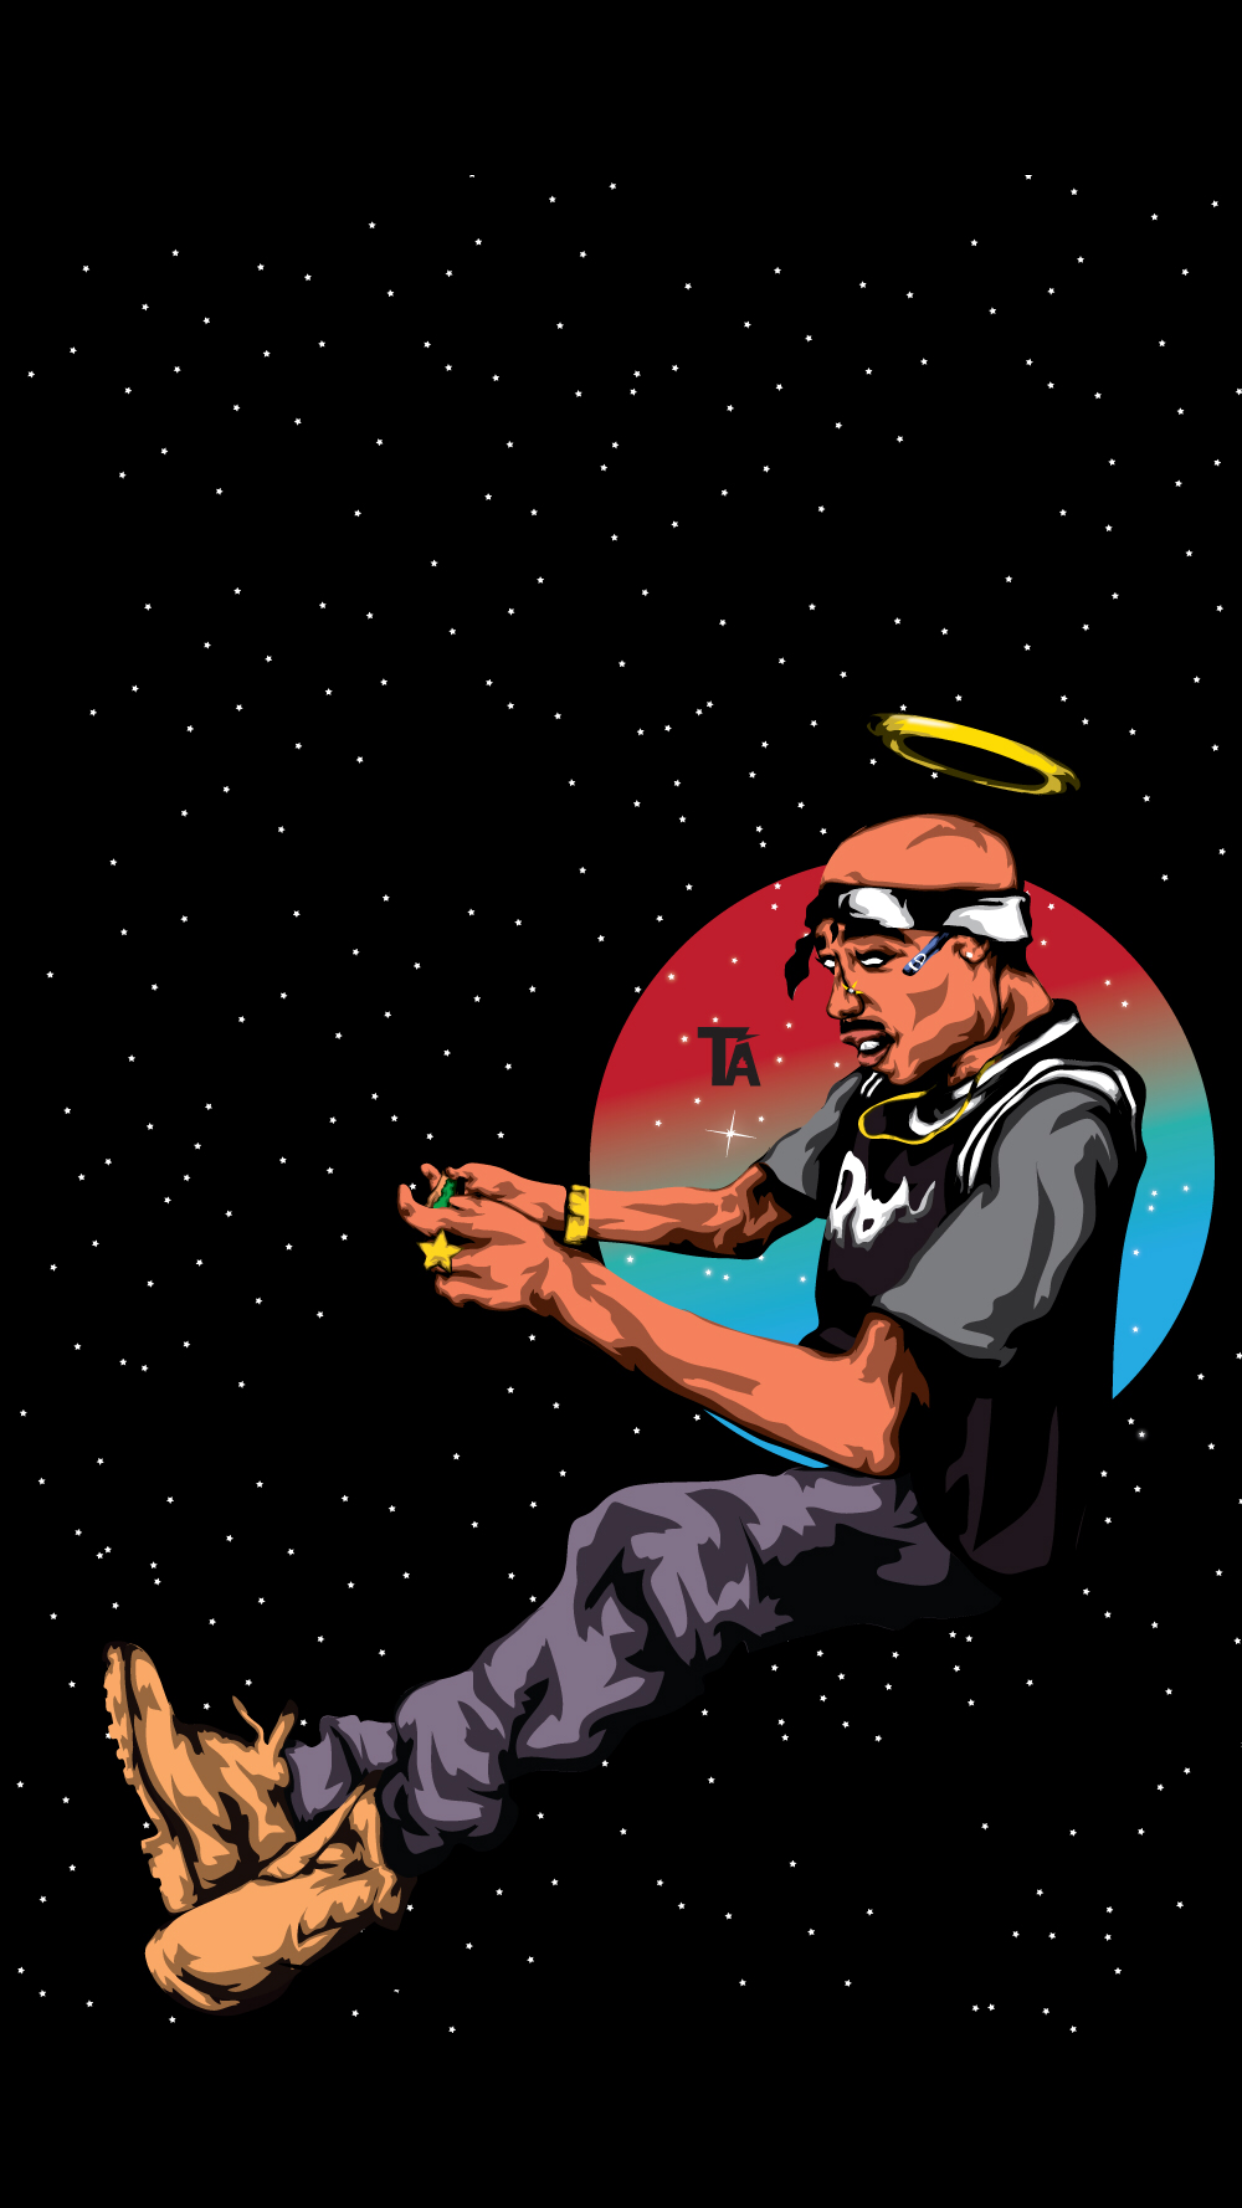 rapper wallpapers for iphone,cartoon,illustration,performance,performing arts,talent show